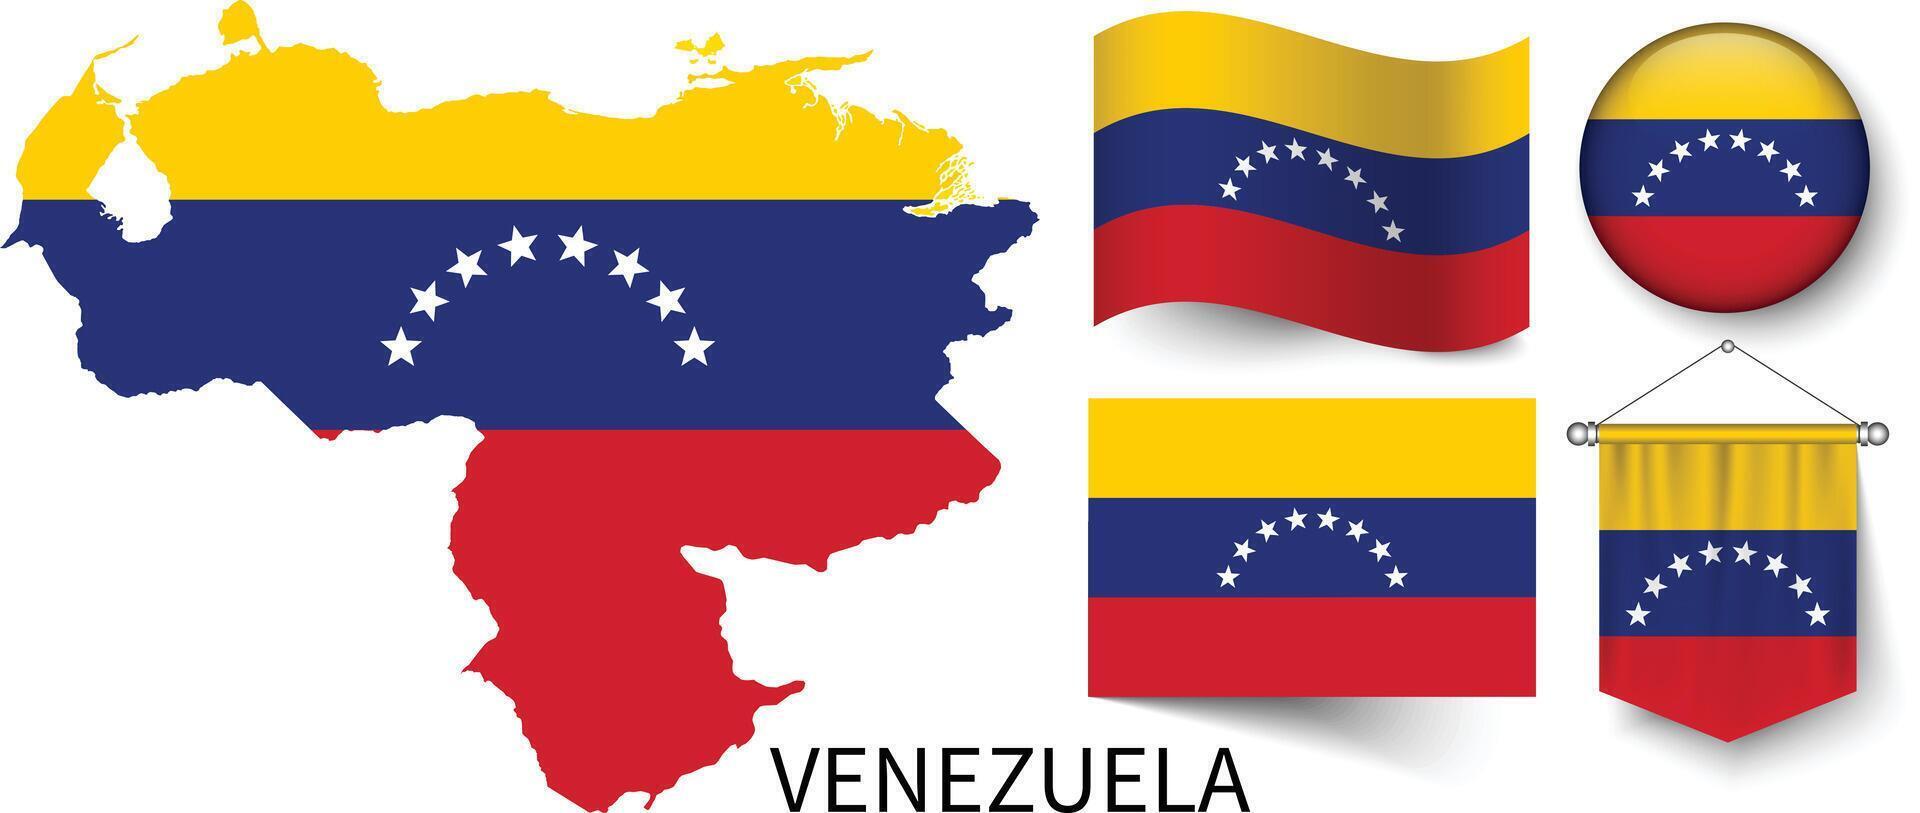 The various patterns of the Venezuela national flags and the map of Venezuela's borders vector